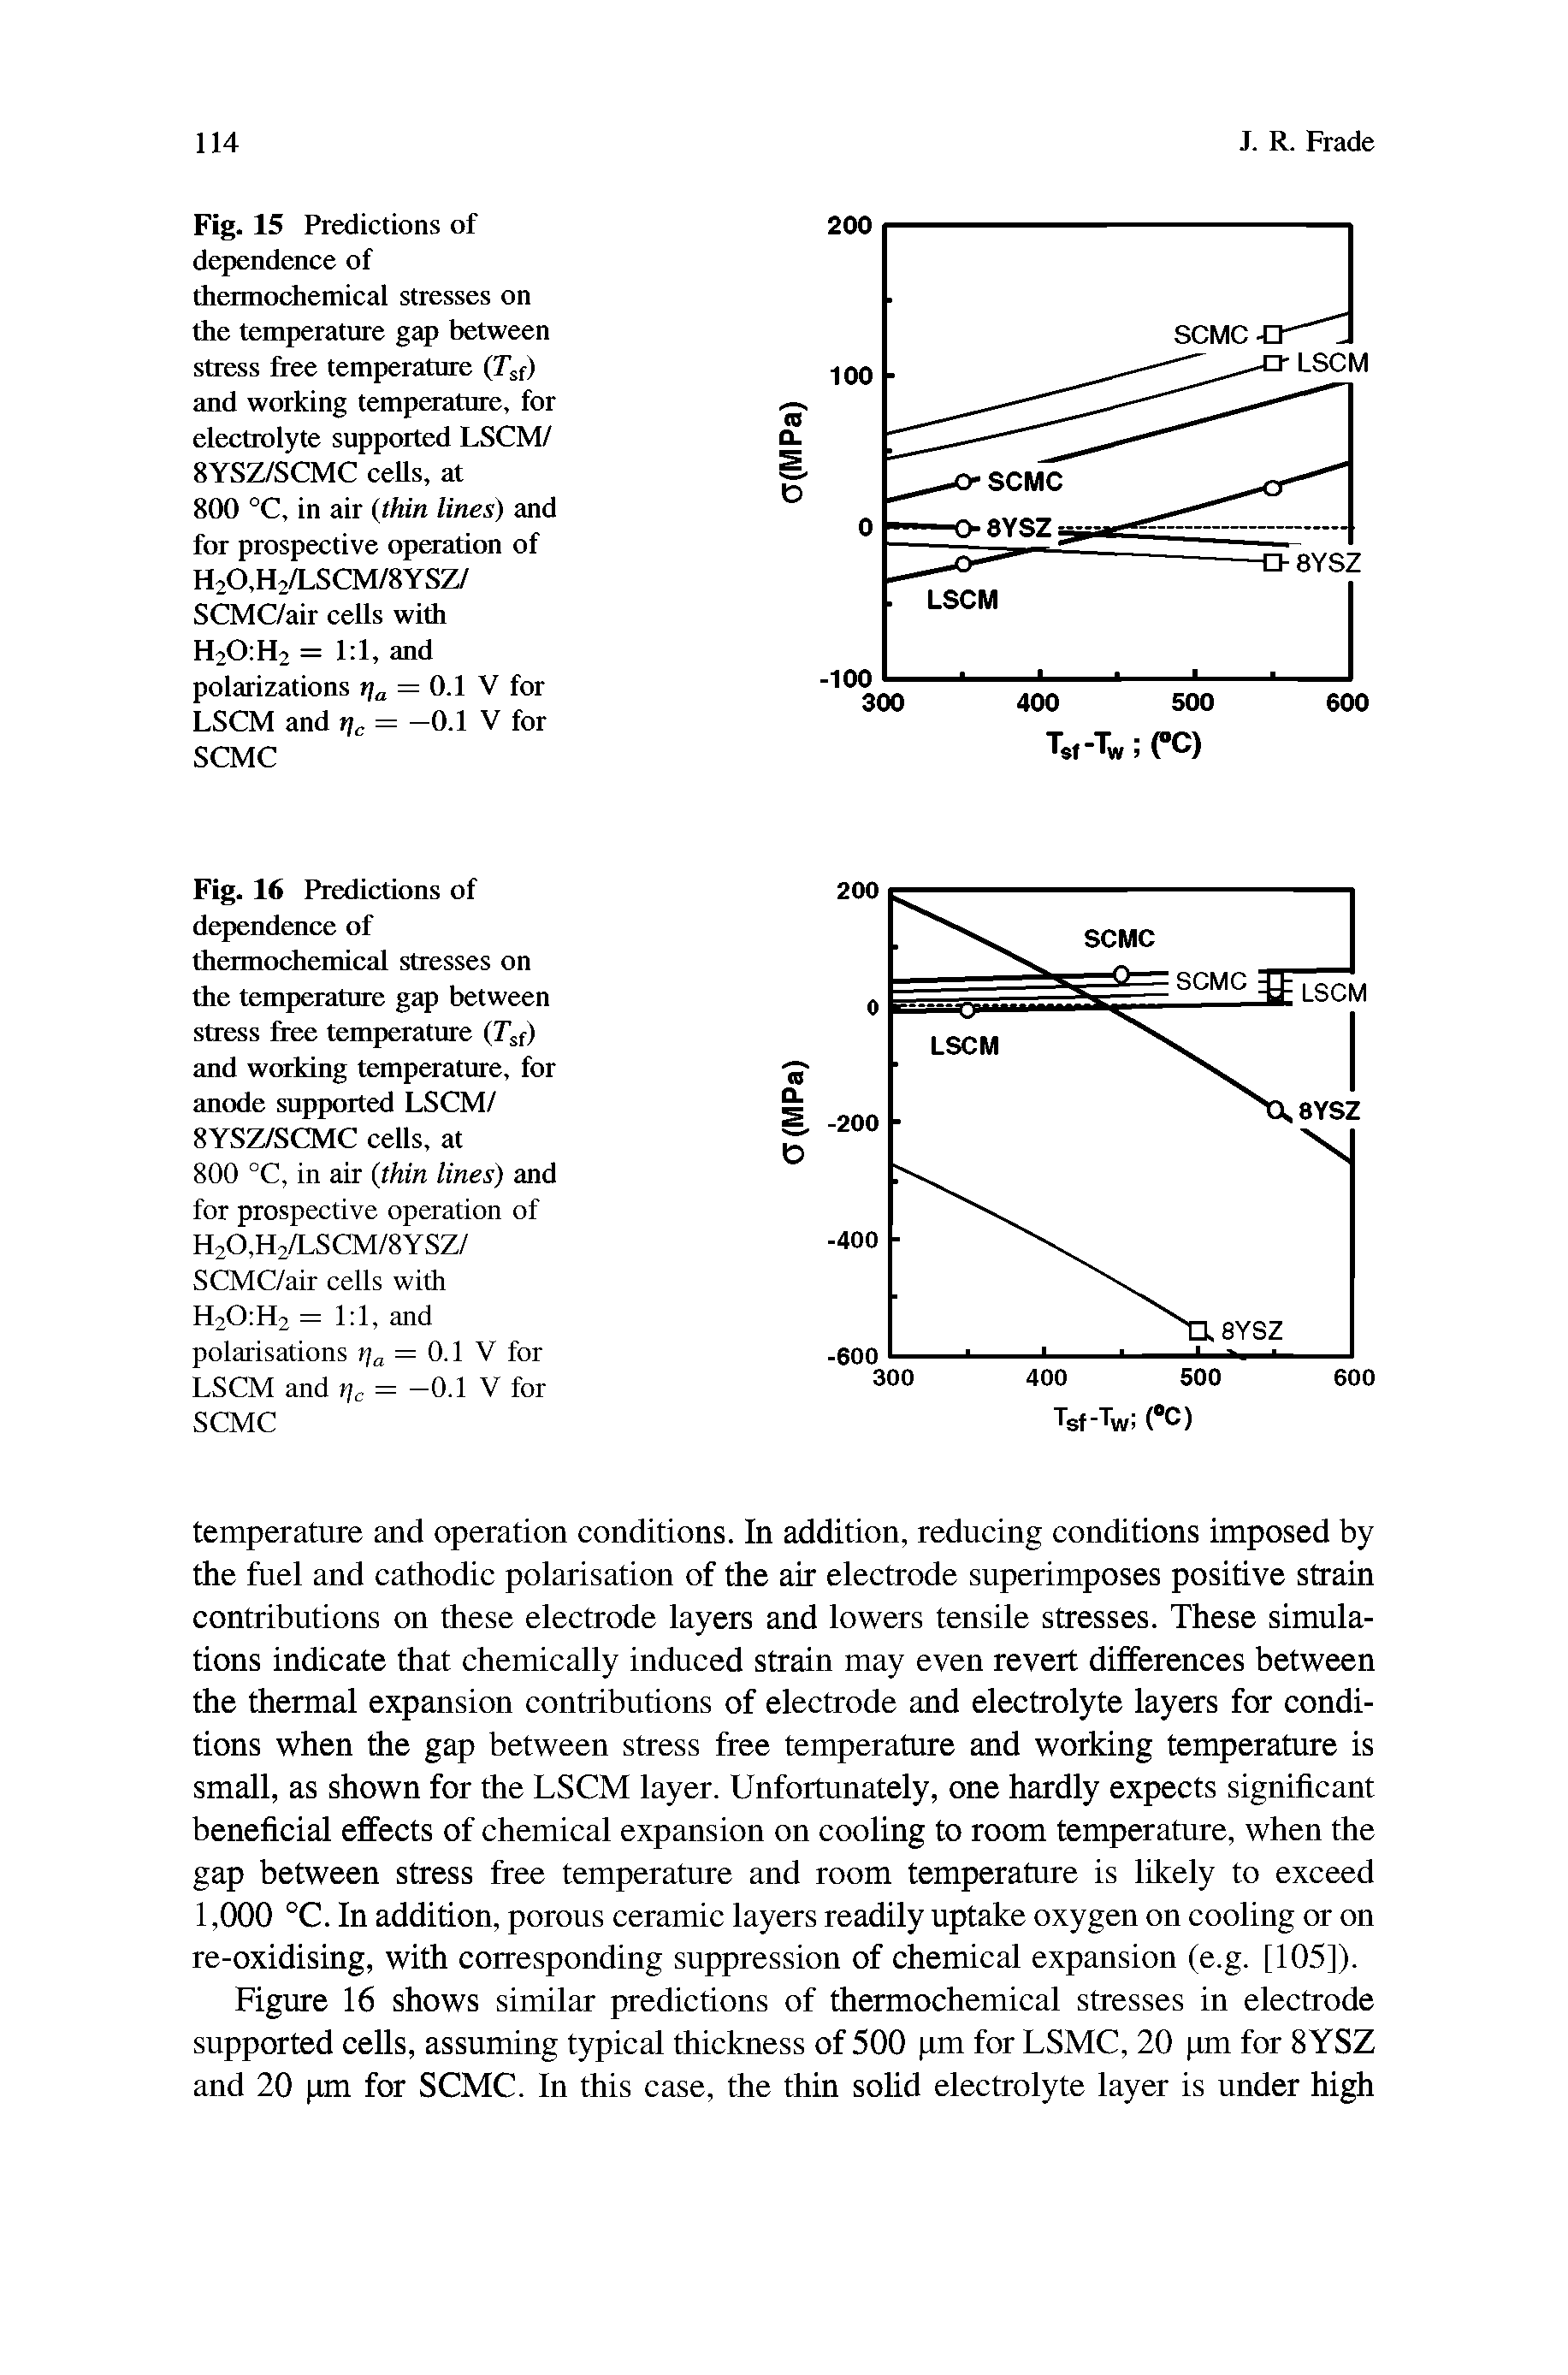 Fig. 15 Predictions of dependence of thermochemical stresses on the temperature gap between stress free temperature (T f) and working temperature, for electrolyte supported LSCM/ 8YSZ/SCMC ceUs, at 800 °C, in air thin lines) and for prospective operation of H20,H2/LSCM/8YSZy SCMC/air cells with H20 H2 = 1 1, and polarizations = 0.1 V for LSCM and = -0.1 V for SCMC...